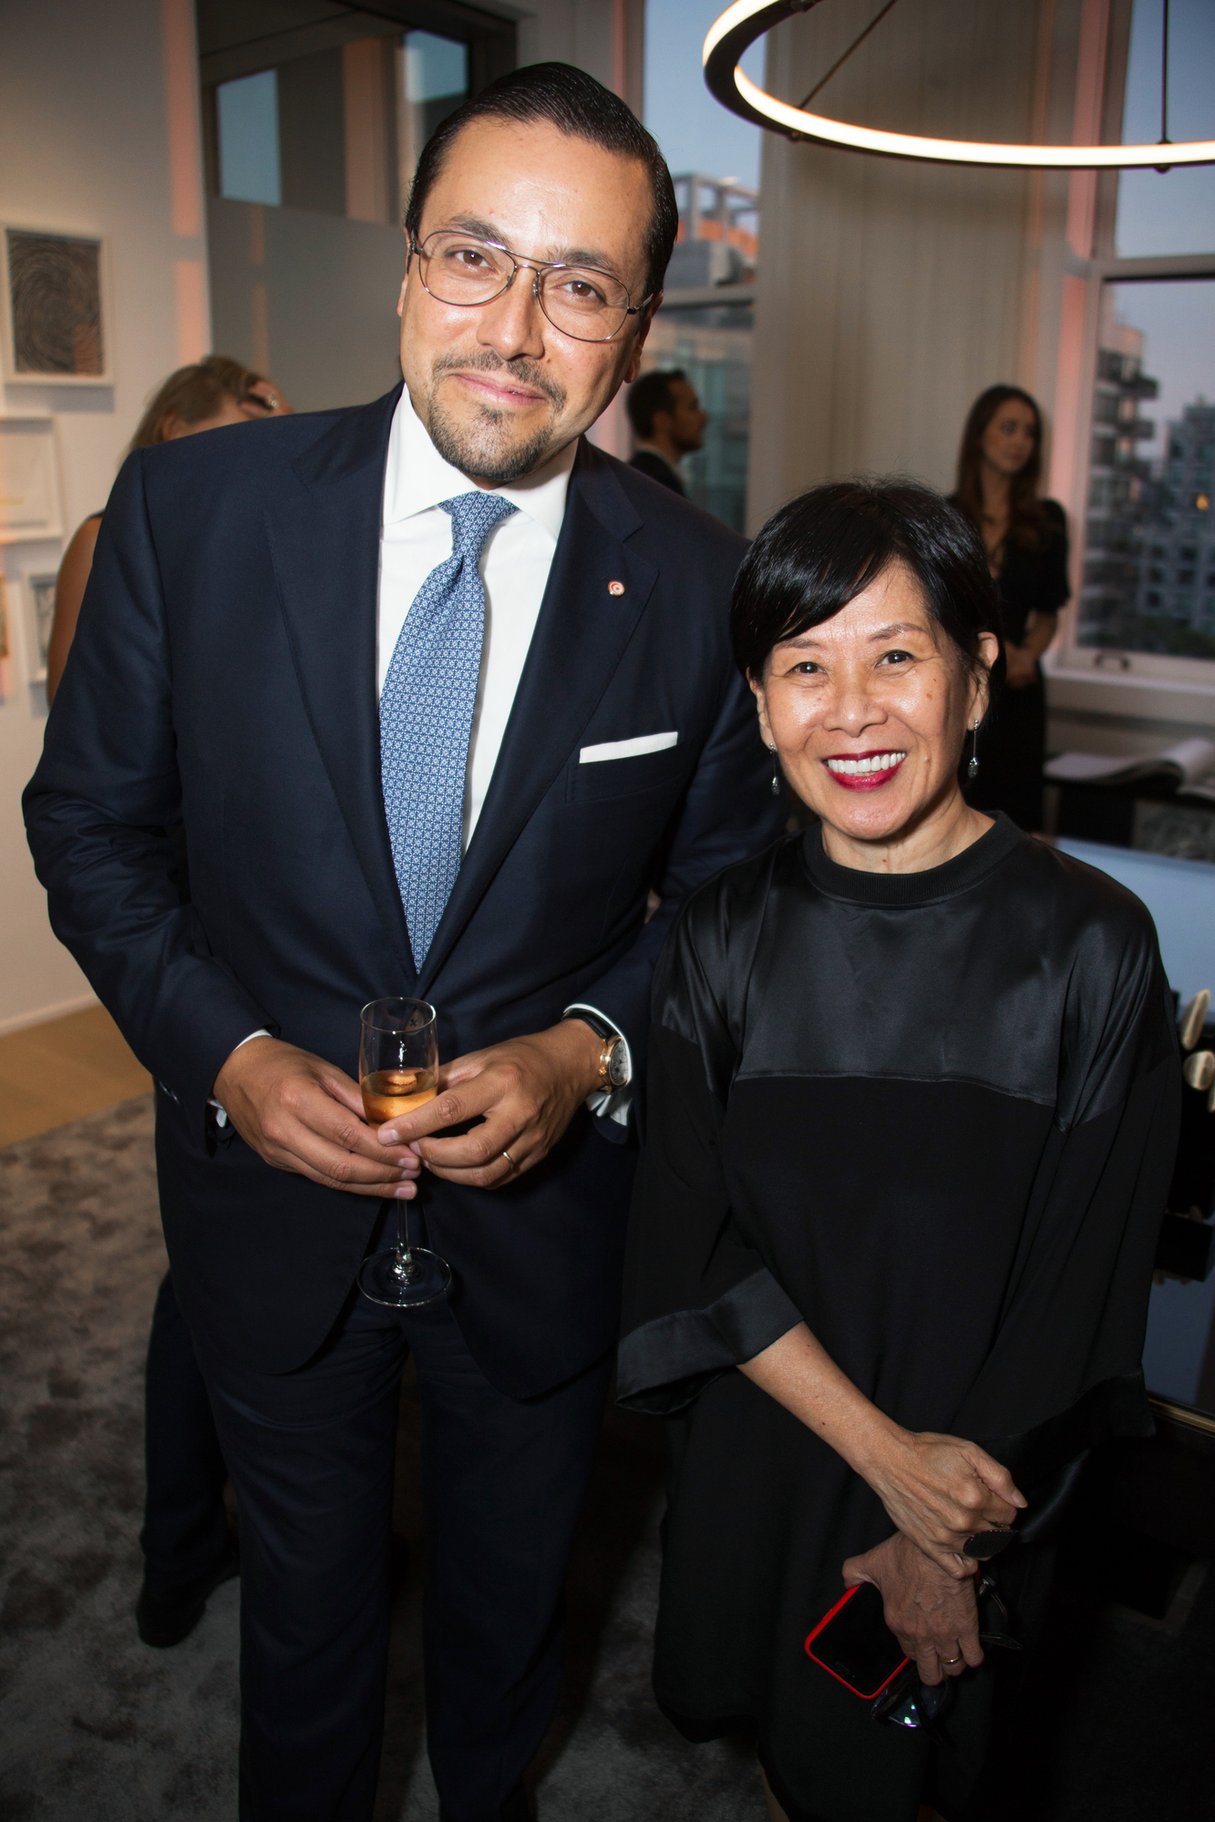 NEW YORK, NY - SEPTEMBER 20: Hazem Ben - Gacem, Meeling Wong attend launch event for the Georg Jensen X Zaha Hadid jewelry collection at 511 West 25th Street on September 20, 2016 in New York City. (Photo by Victor Hugo/Patrick McMullan via Getty Images) &copy; Patrick McMullan via Getty Image